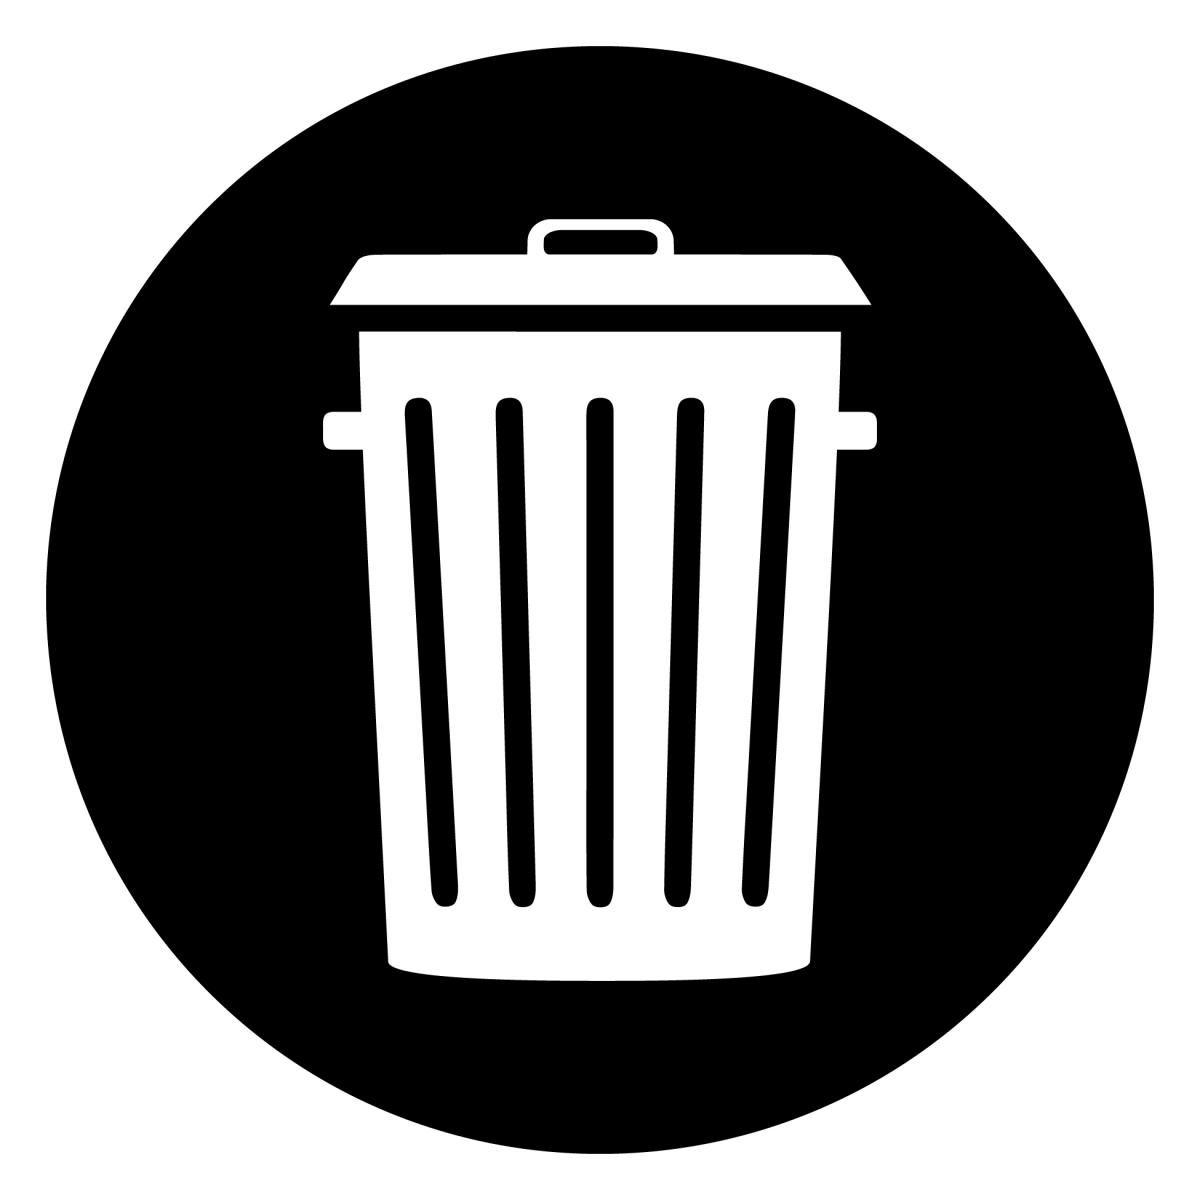 Black and White Recycle Logo - Universal Recycling Downloads. Department of Environmental Conservation